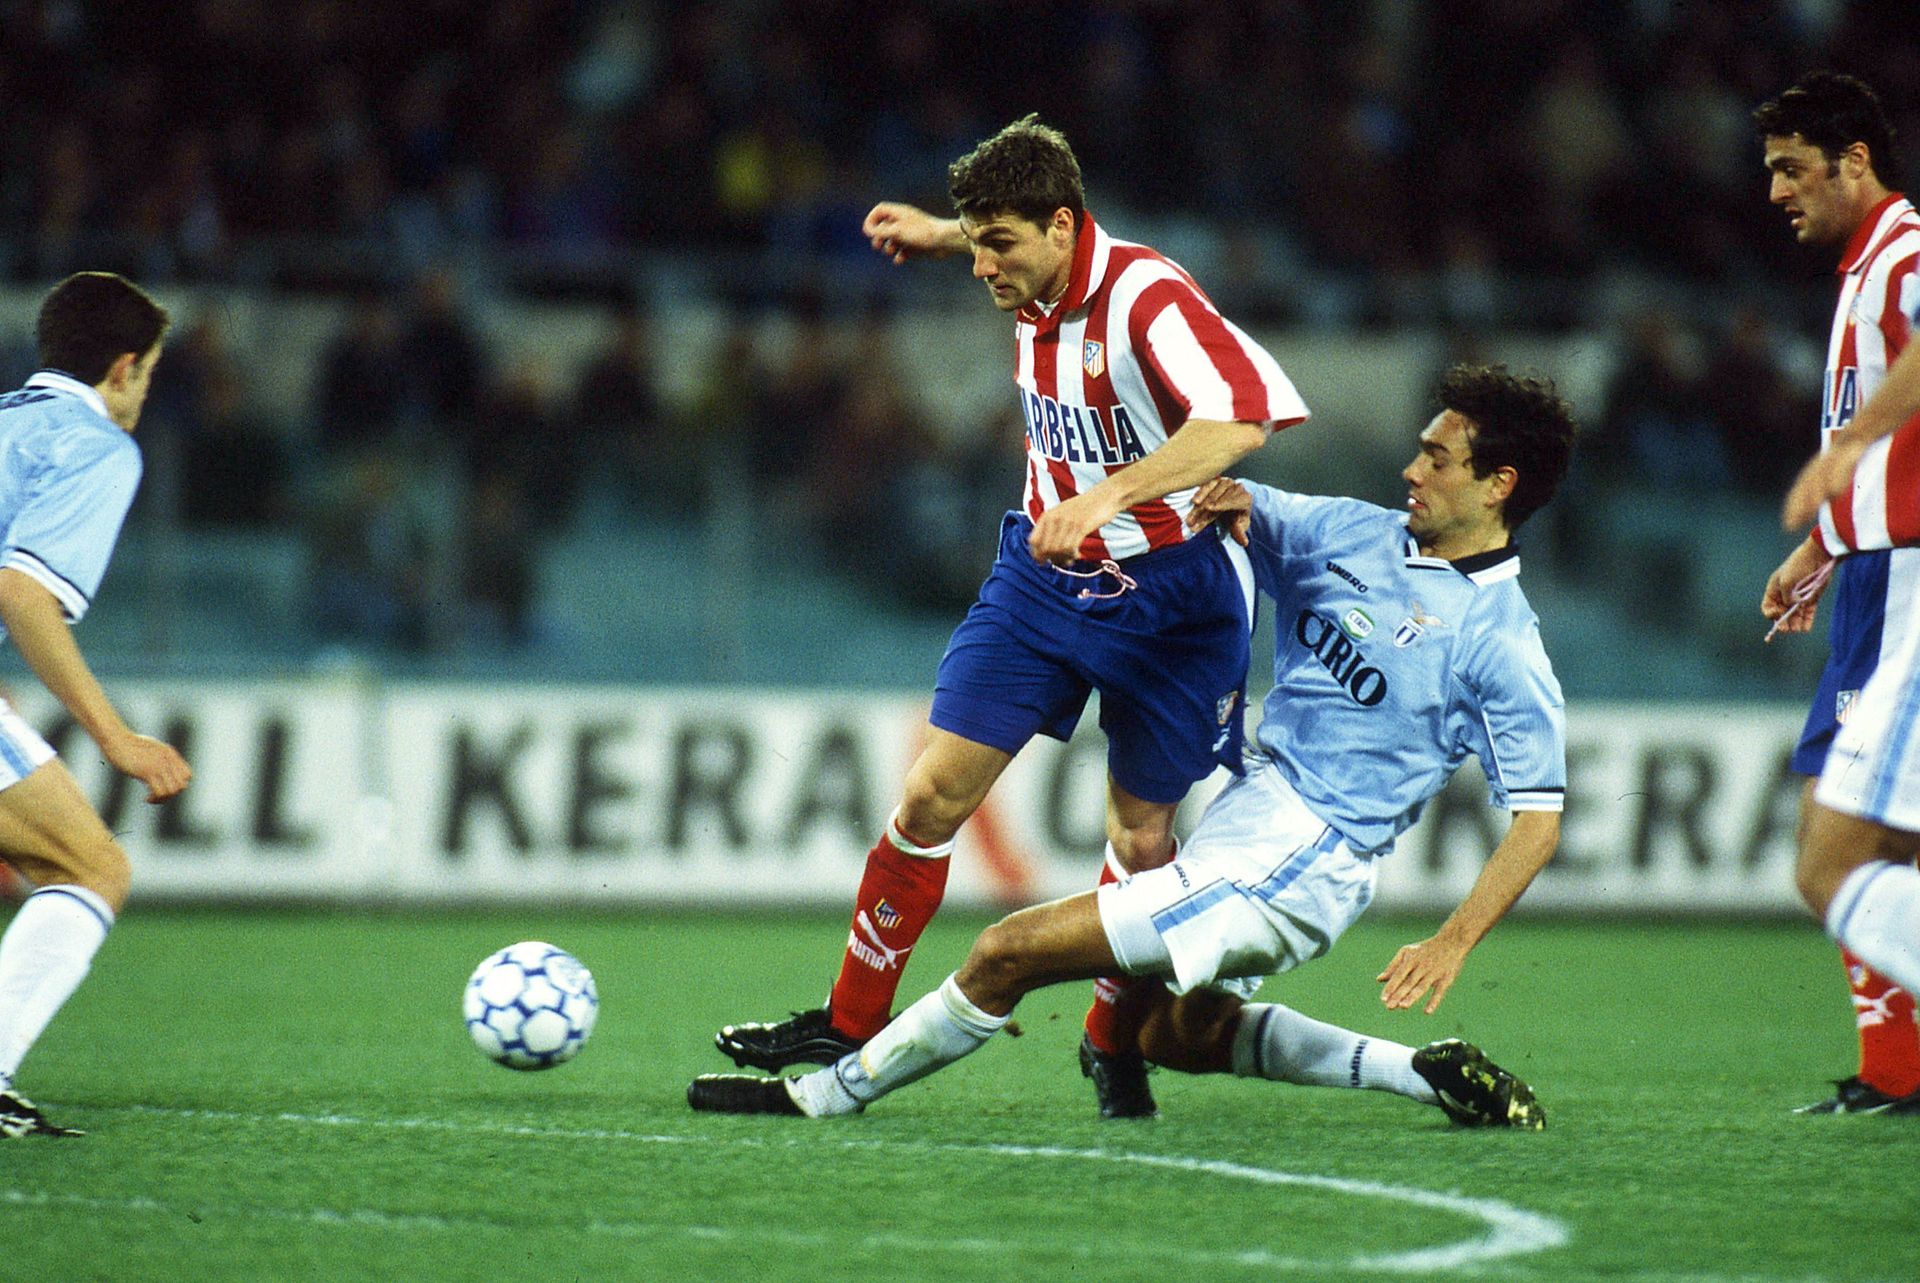 <p>                     Christian Vieri features frequently among the biggest transfers of the 1990s and one of those moves saw the Italy striker sign for Atletico Madrid in 1997.                   </p>                                      <p>                     Vieri was surprisingly sold to Atletico for €17.56 million and joined Juninho at the Spanish side in an exciting summer spree, but after 24 goals in 24 La Liga games, he returned to Serie A with Lazio a year later.                   </p>